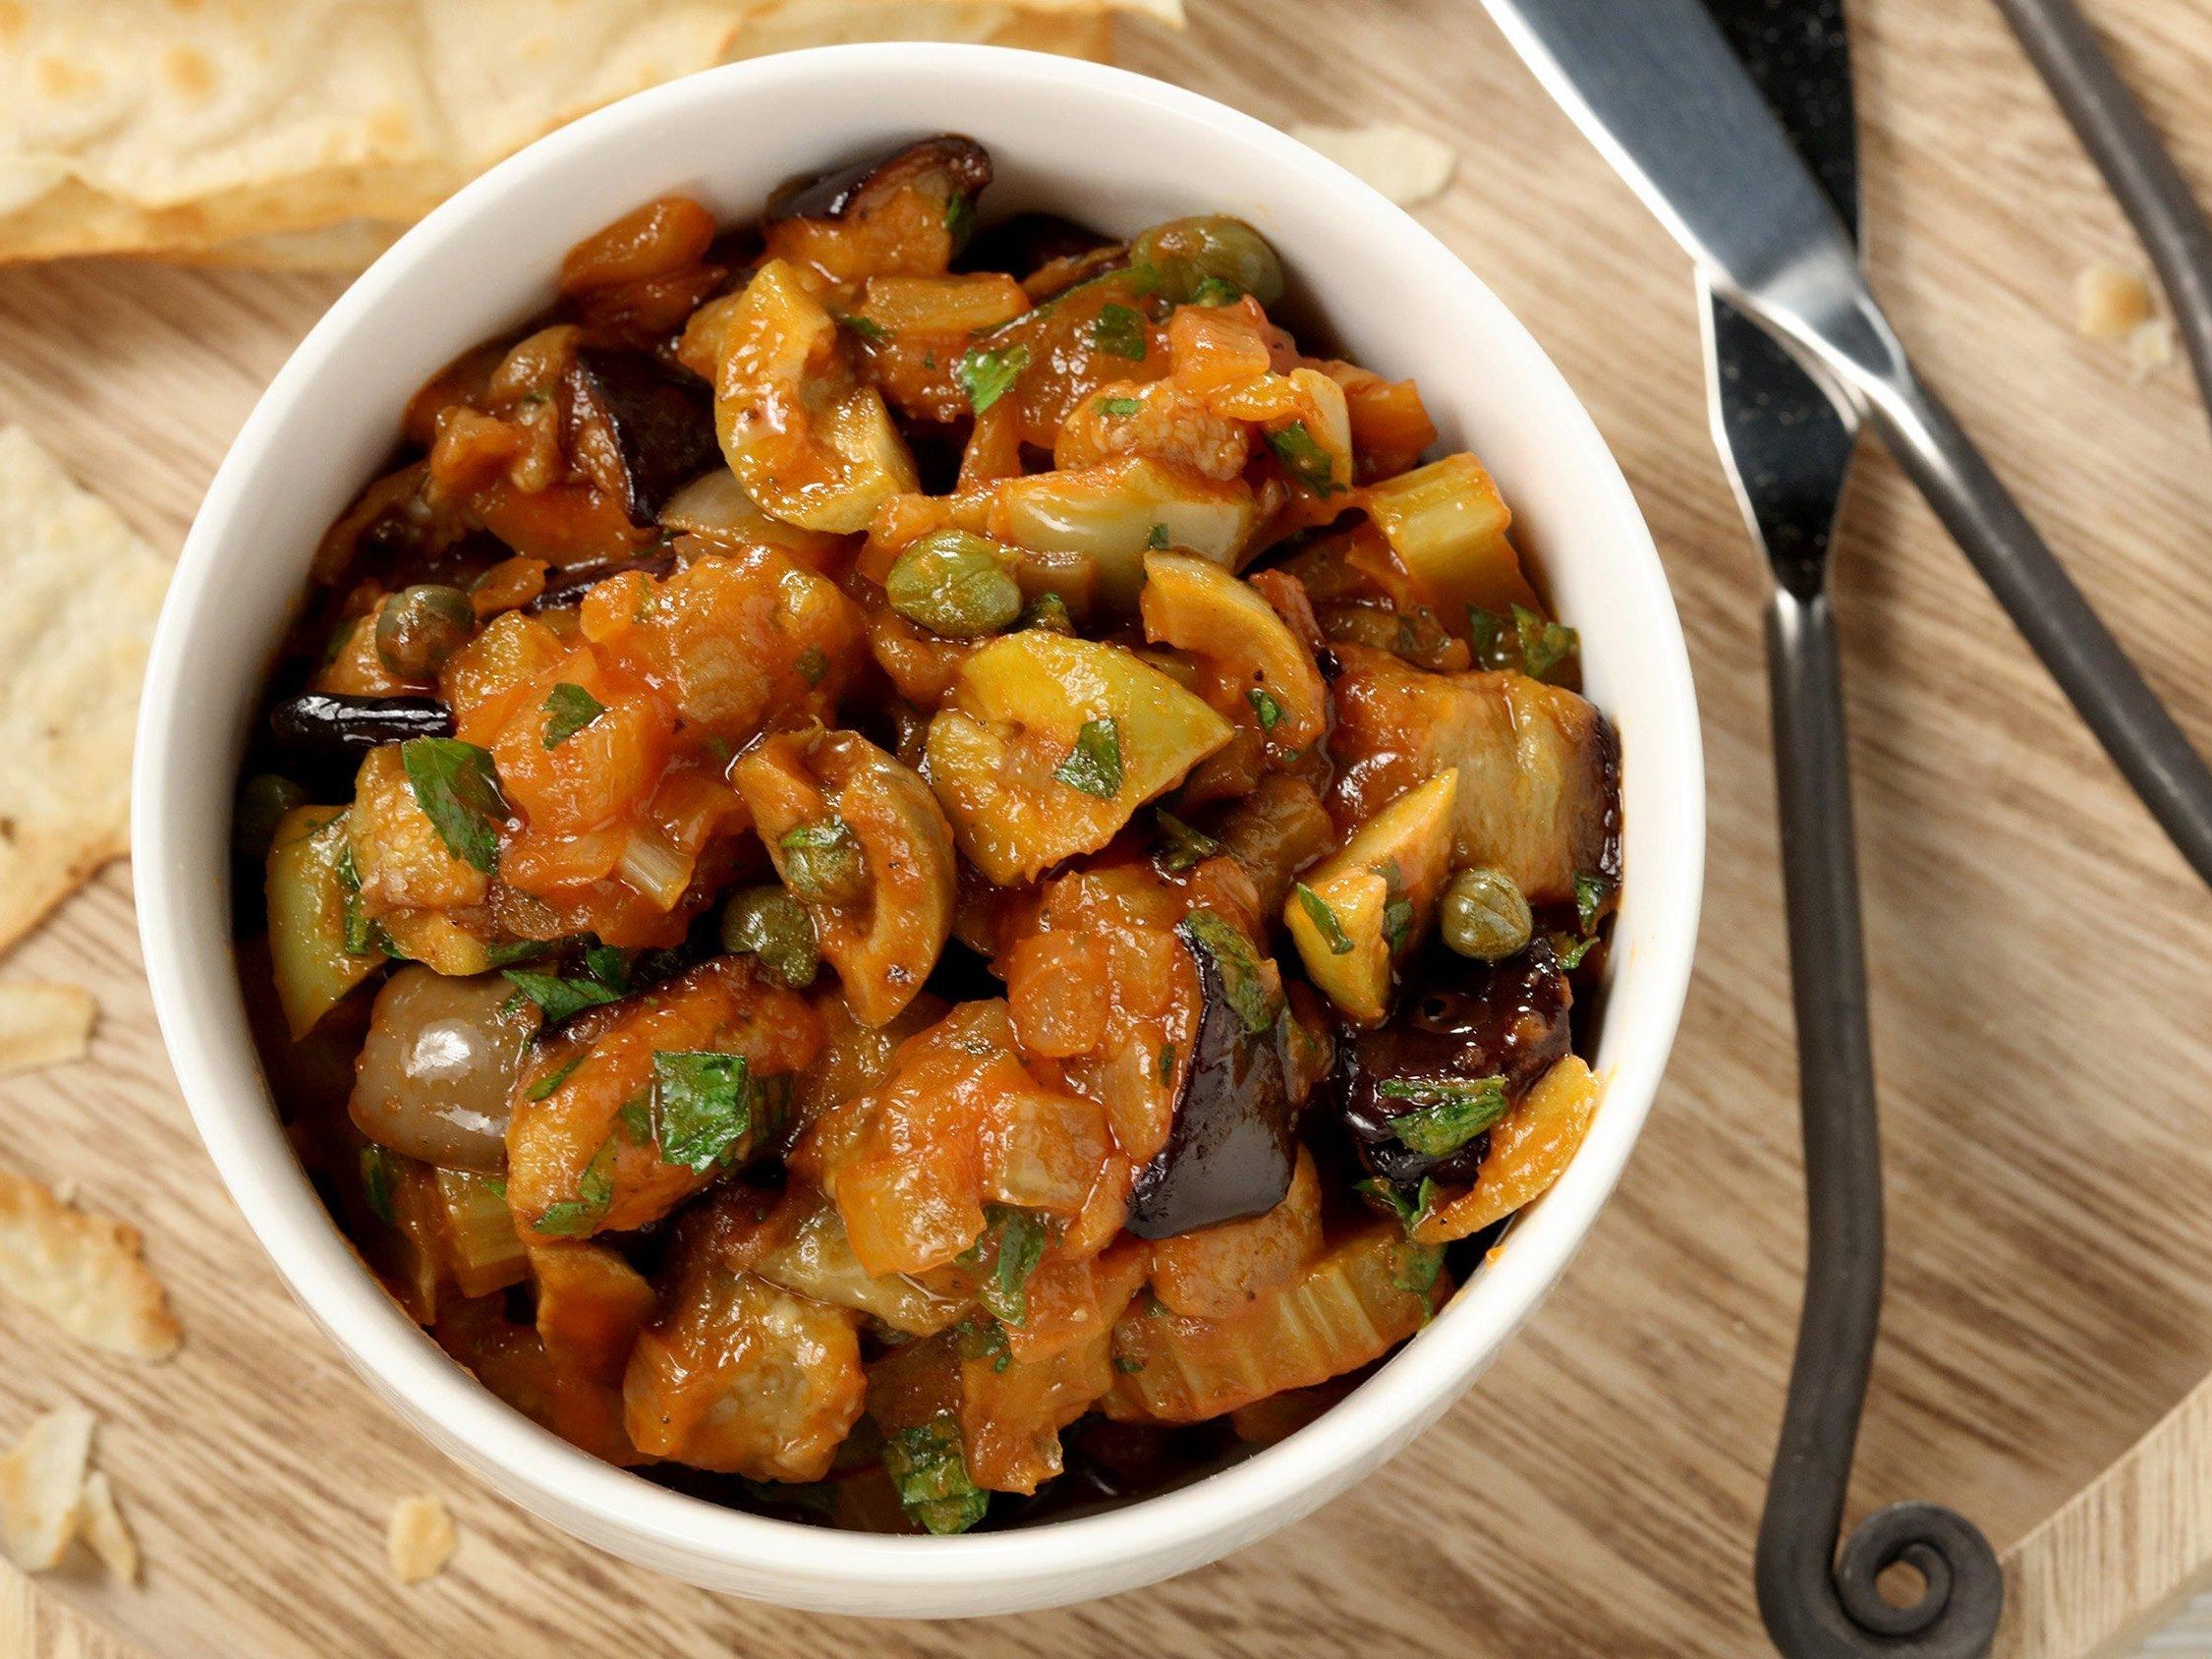 How to make an excellent caponata